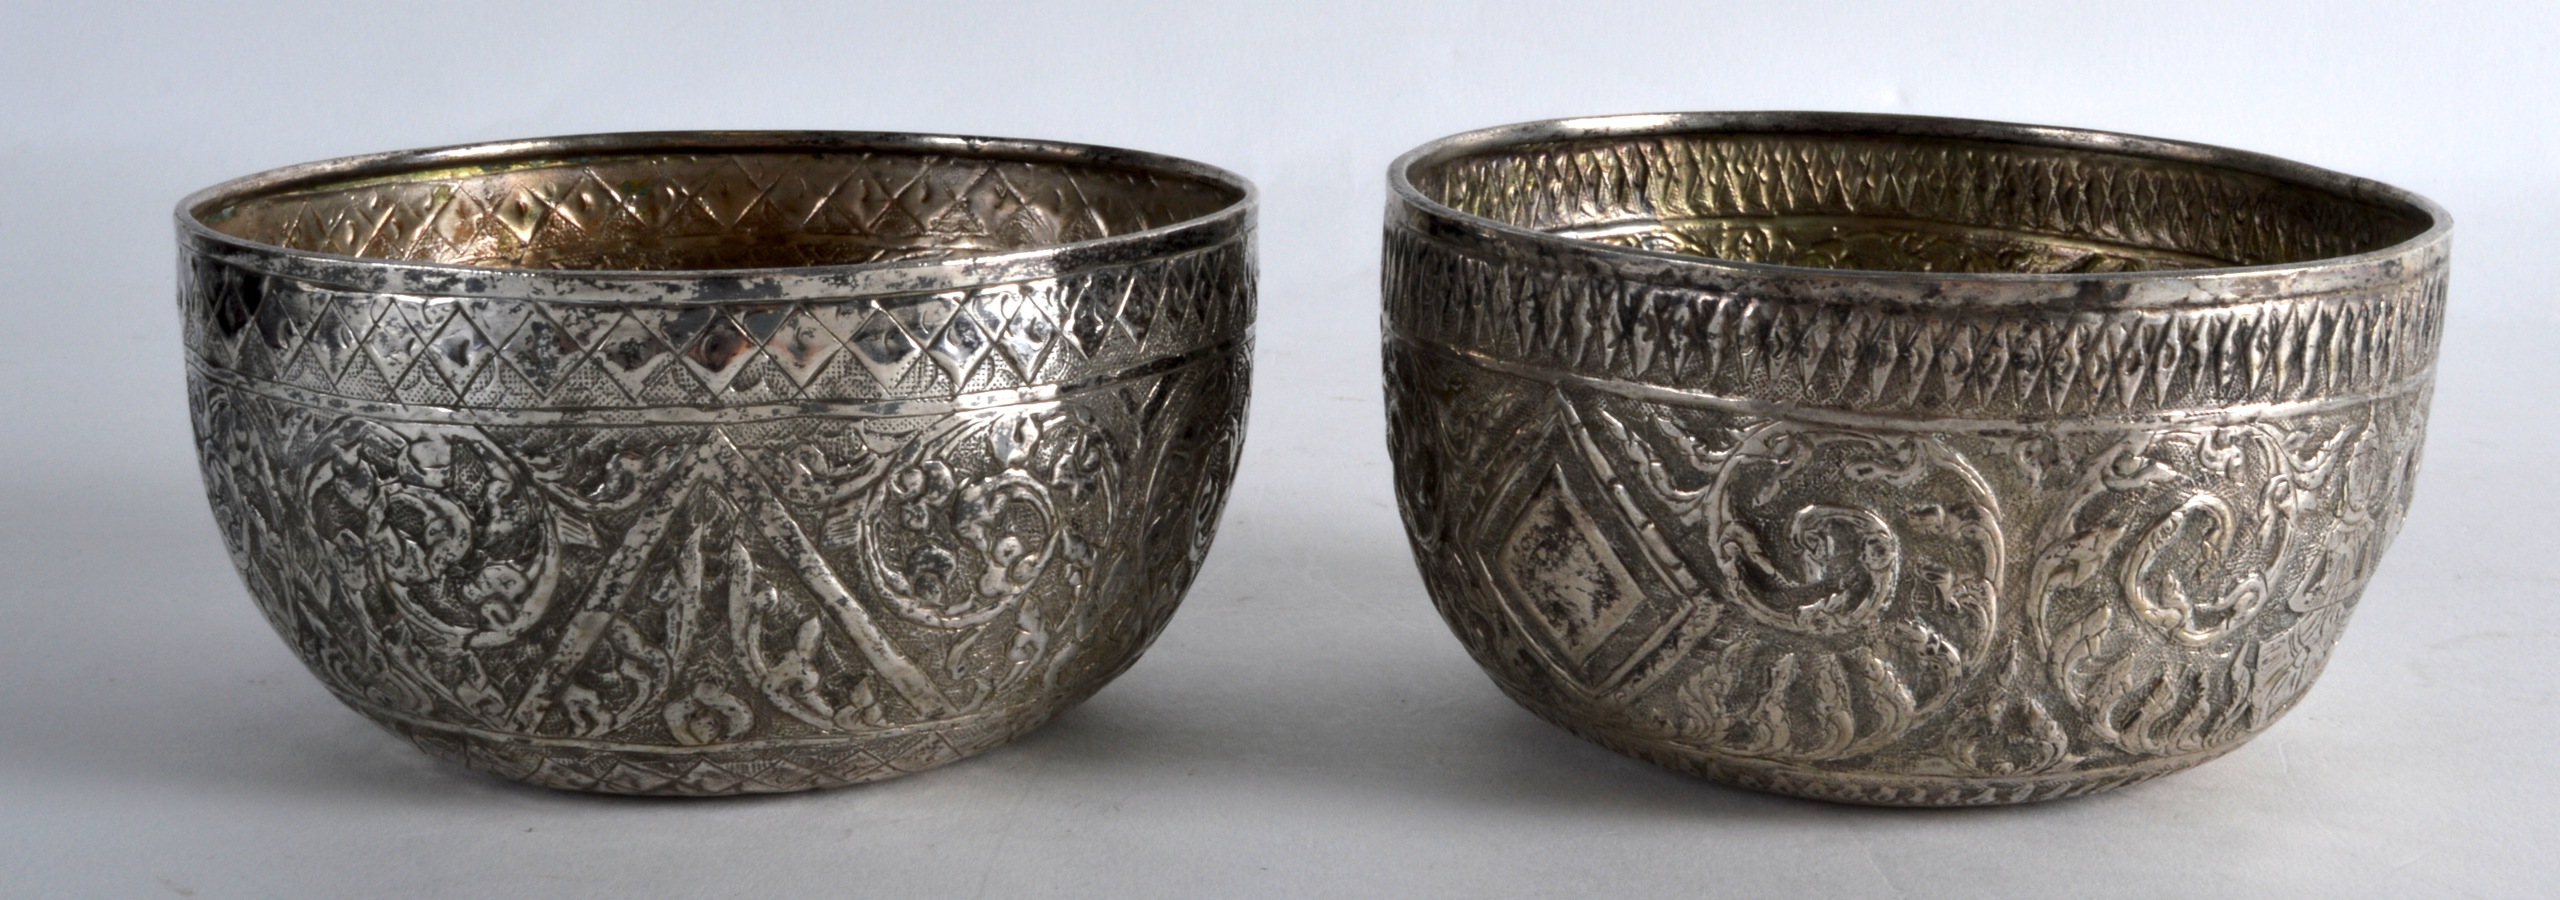 A PAIR OF 19TH CENTURY INDIAN EMBOSSED SILVER BOWLS decorated with buddhistic figures. 2.5oz. 4.5ins